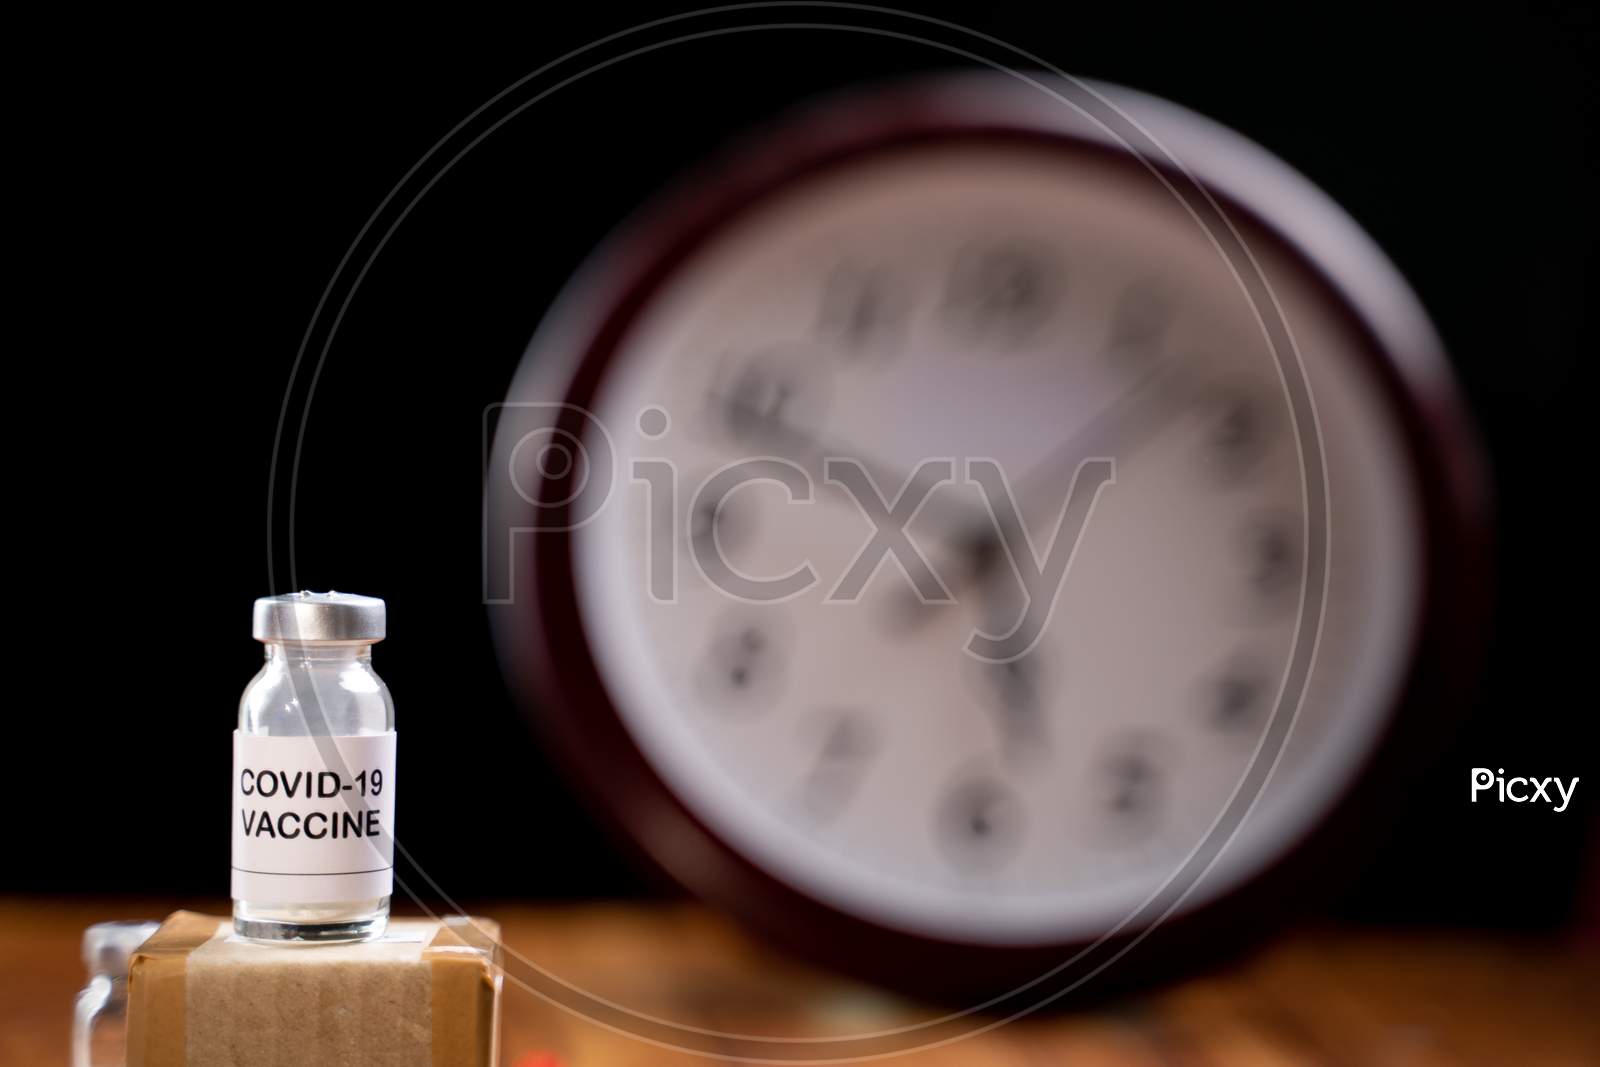 Covid-19 Coronavirus Vaccination Bottle With Clock Behind, Concept Of Covid-19 Vaccine Immunity Duration And Second Dose Time Frame.